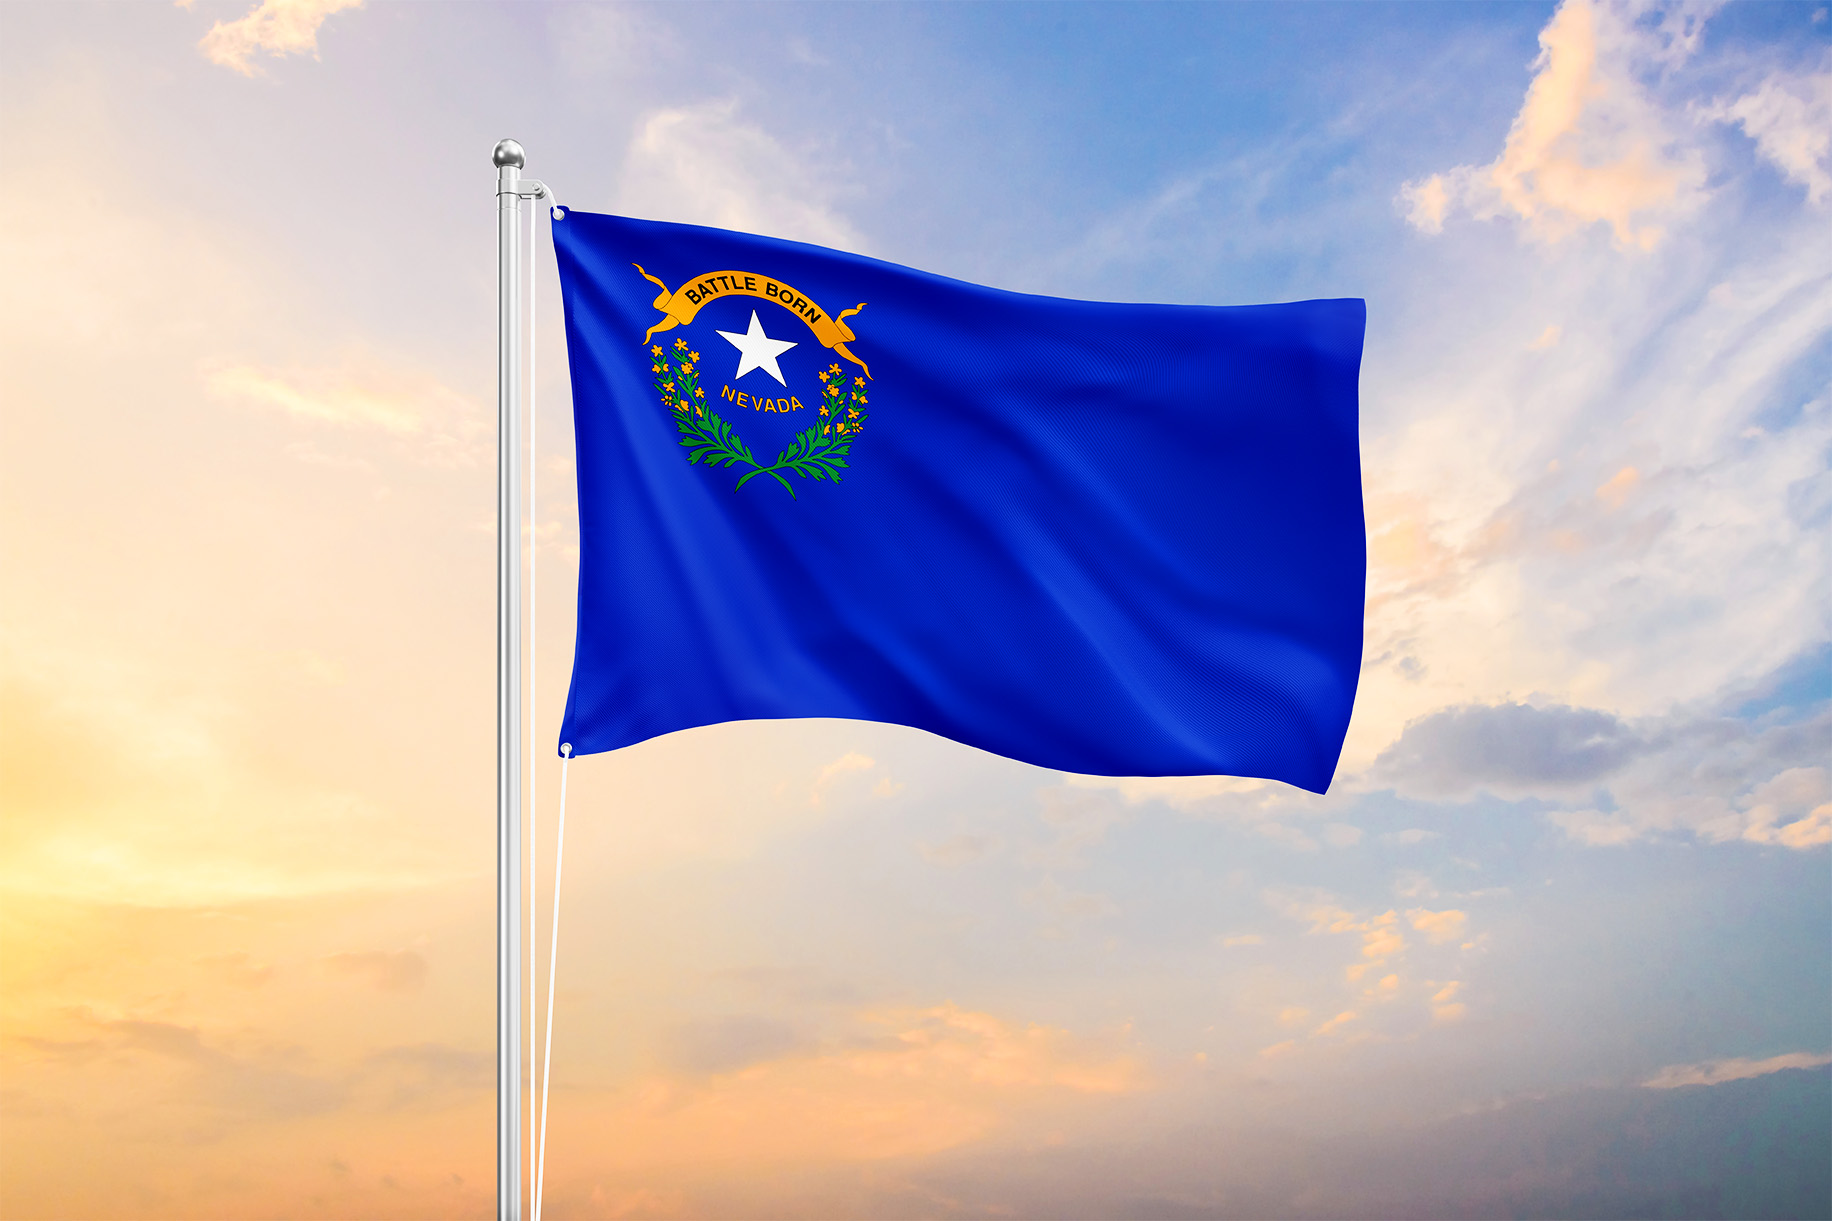 The Nevada State Flag